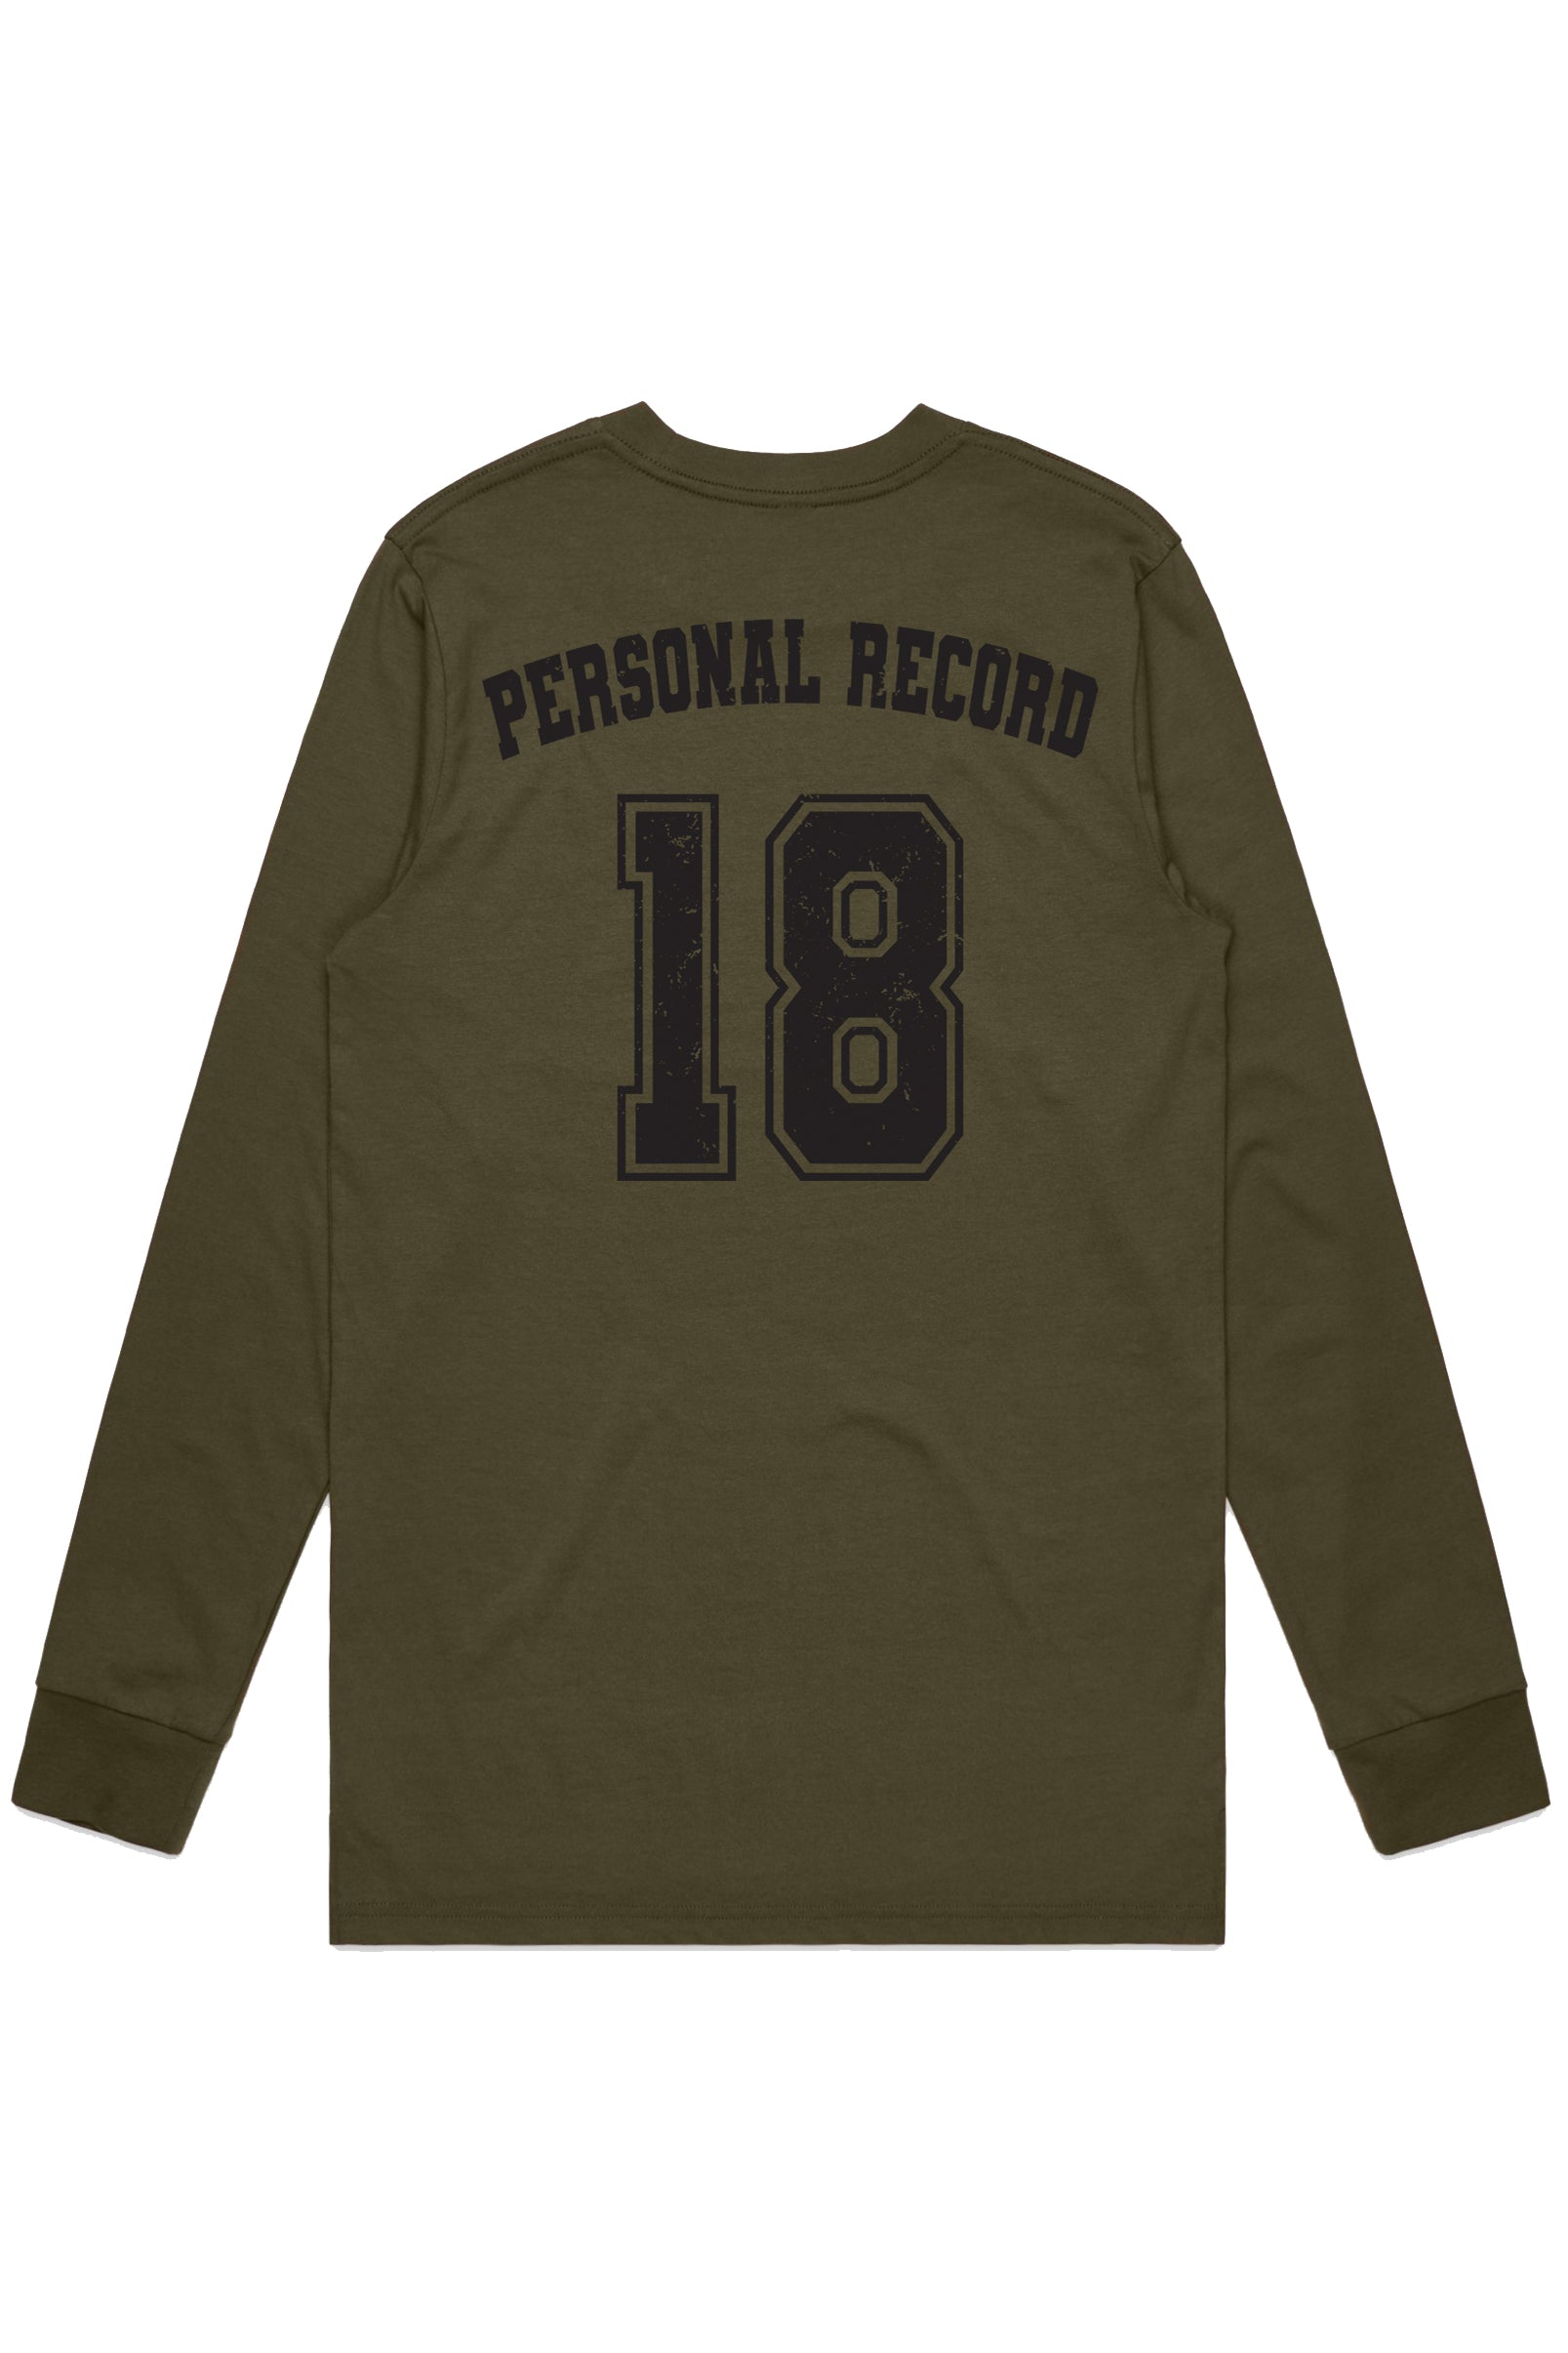 Personal Record 18 Long Sleeve - PR412 - Olive